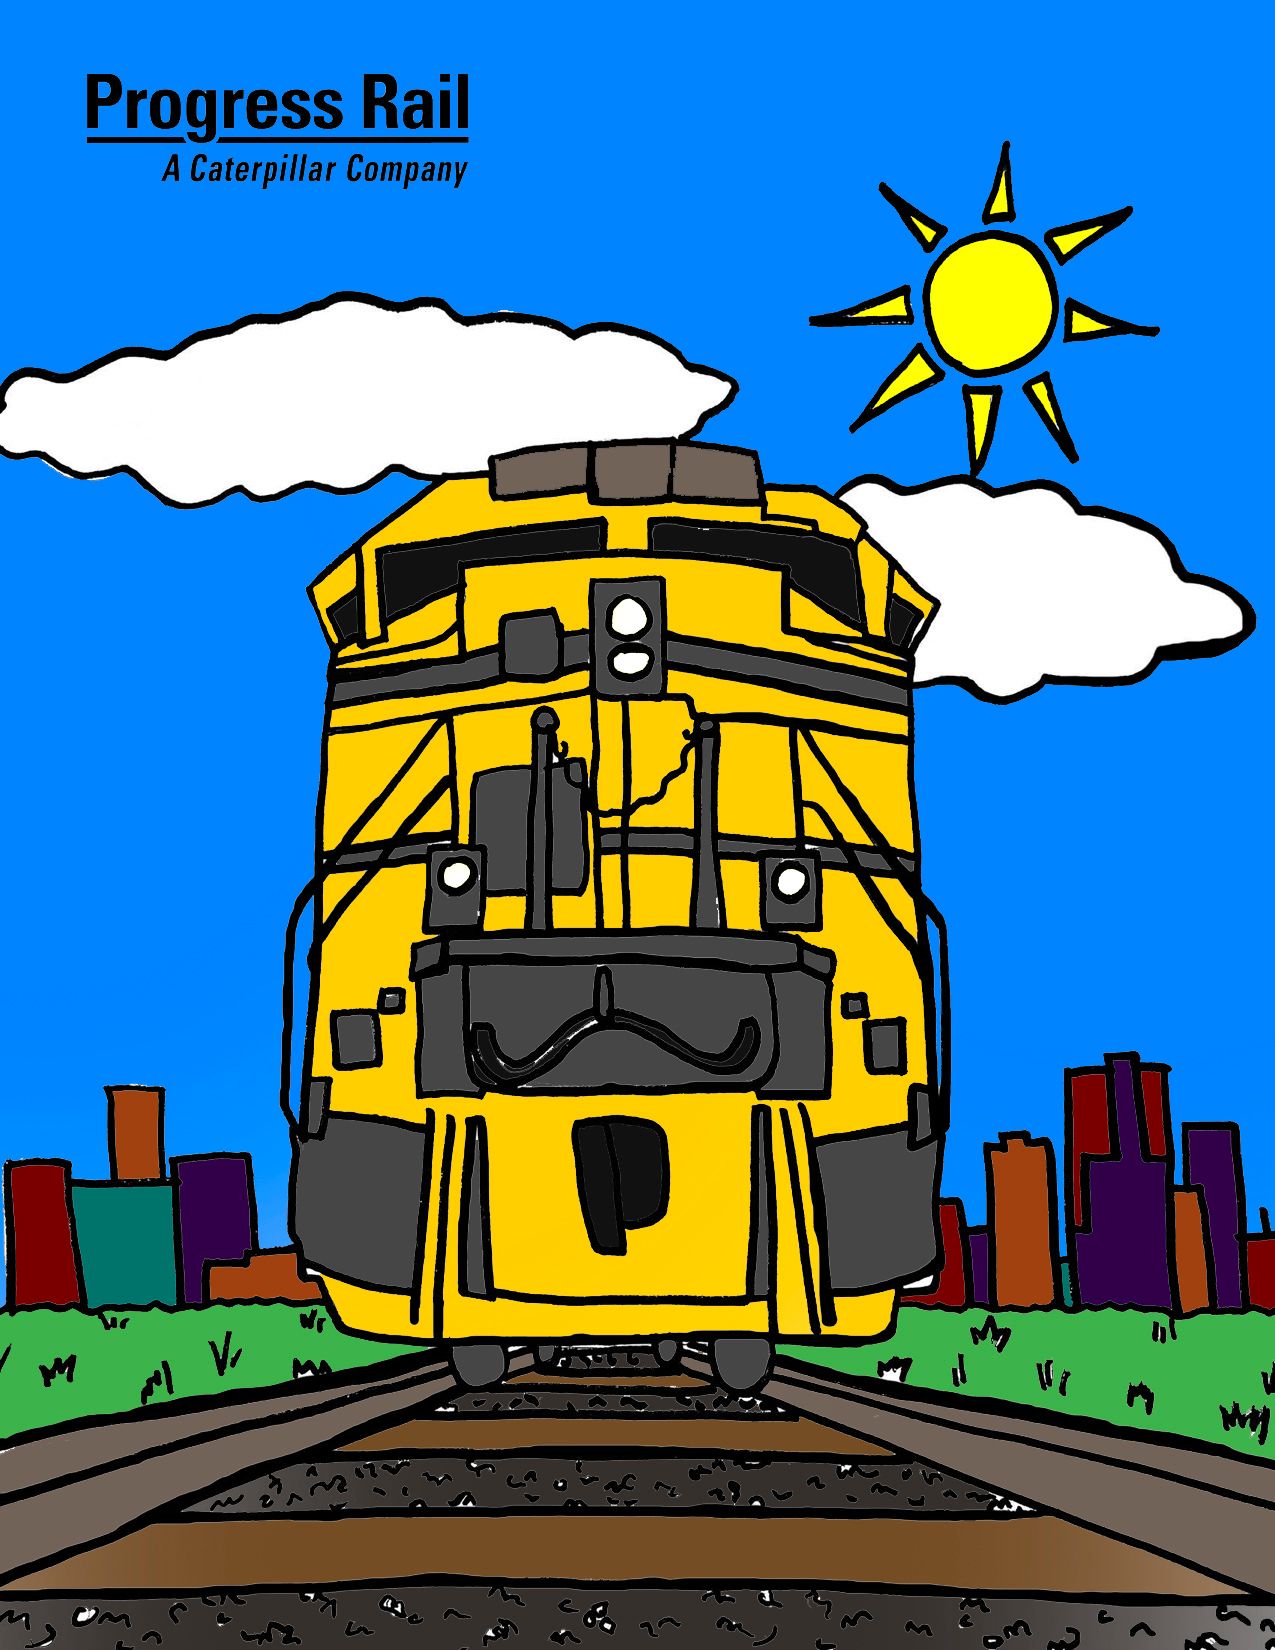 train tracks coloring pages